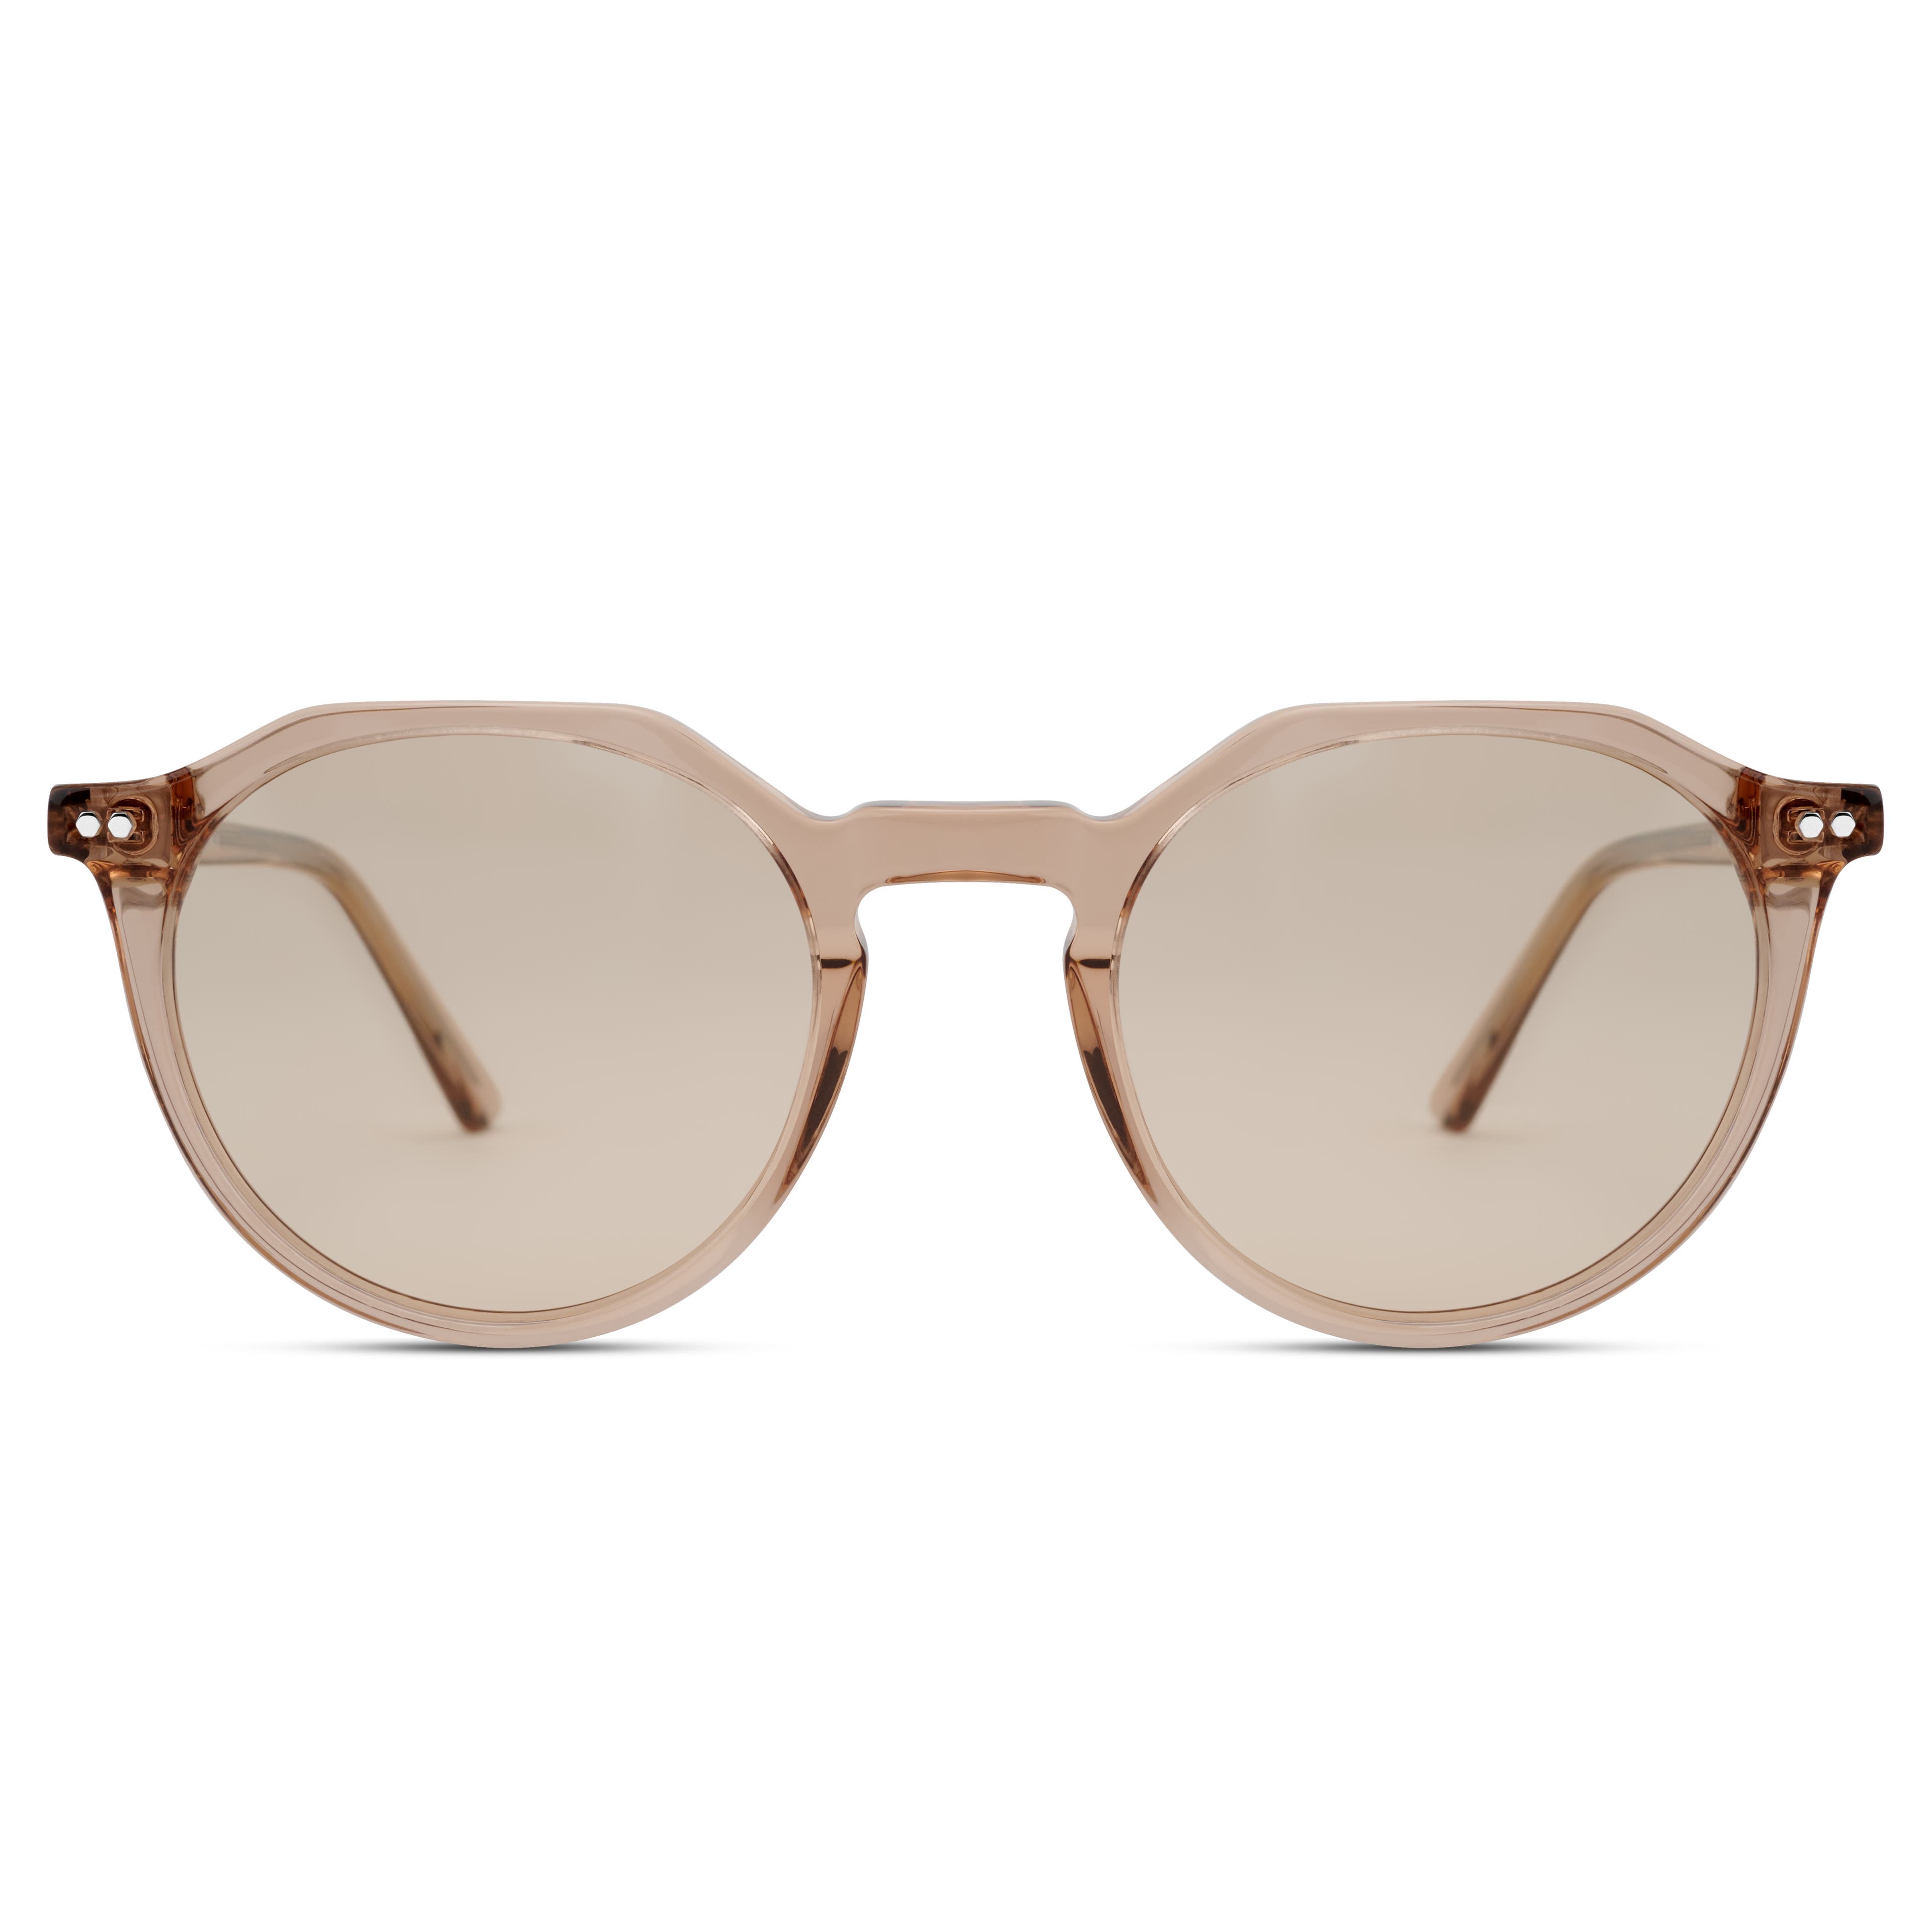 Occasus | Round Translucent Light Brown Horn-rimmed Polarized Sunglasses